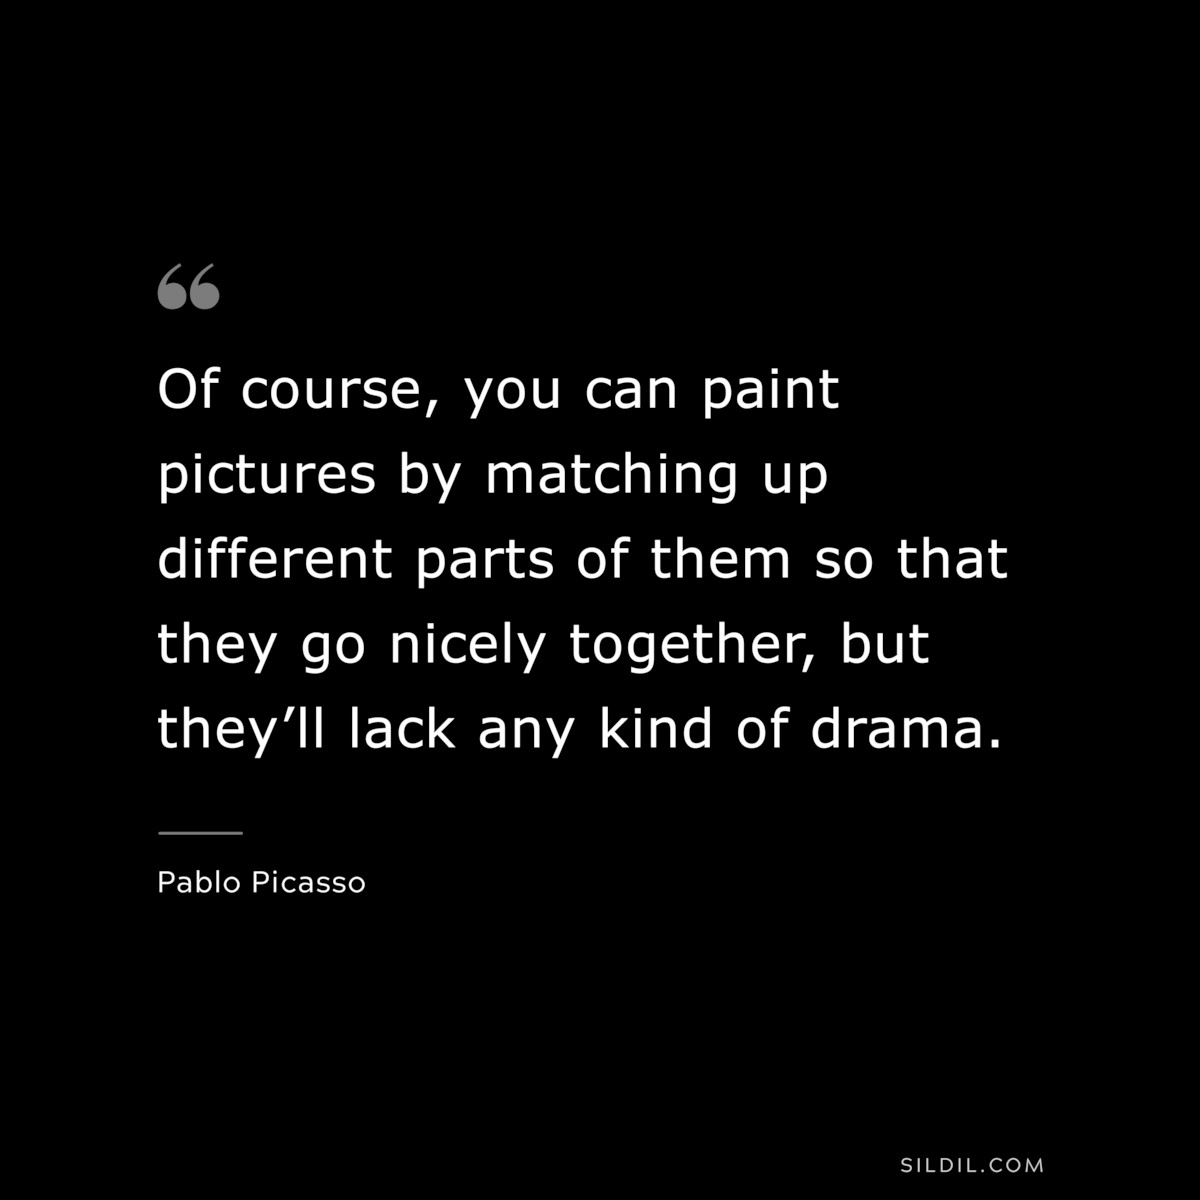 Of course, you can paint pictures by matching up different parts of them so that they go nicely together, but they’ll lack any kind of drama. ― Pablo Picasso